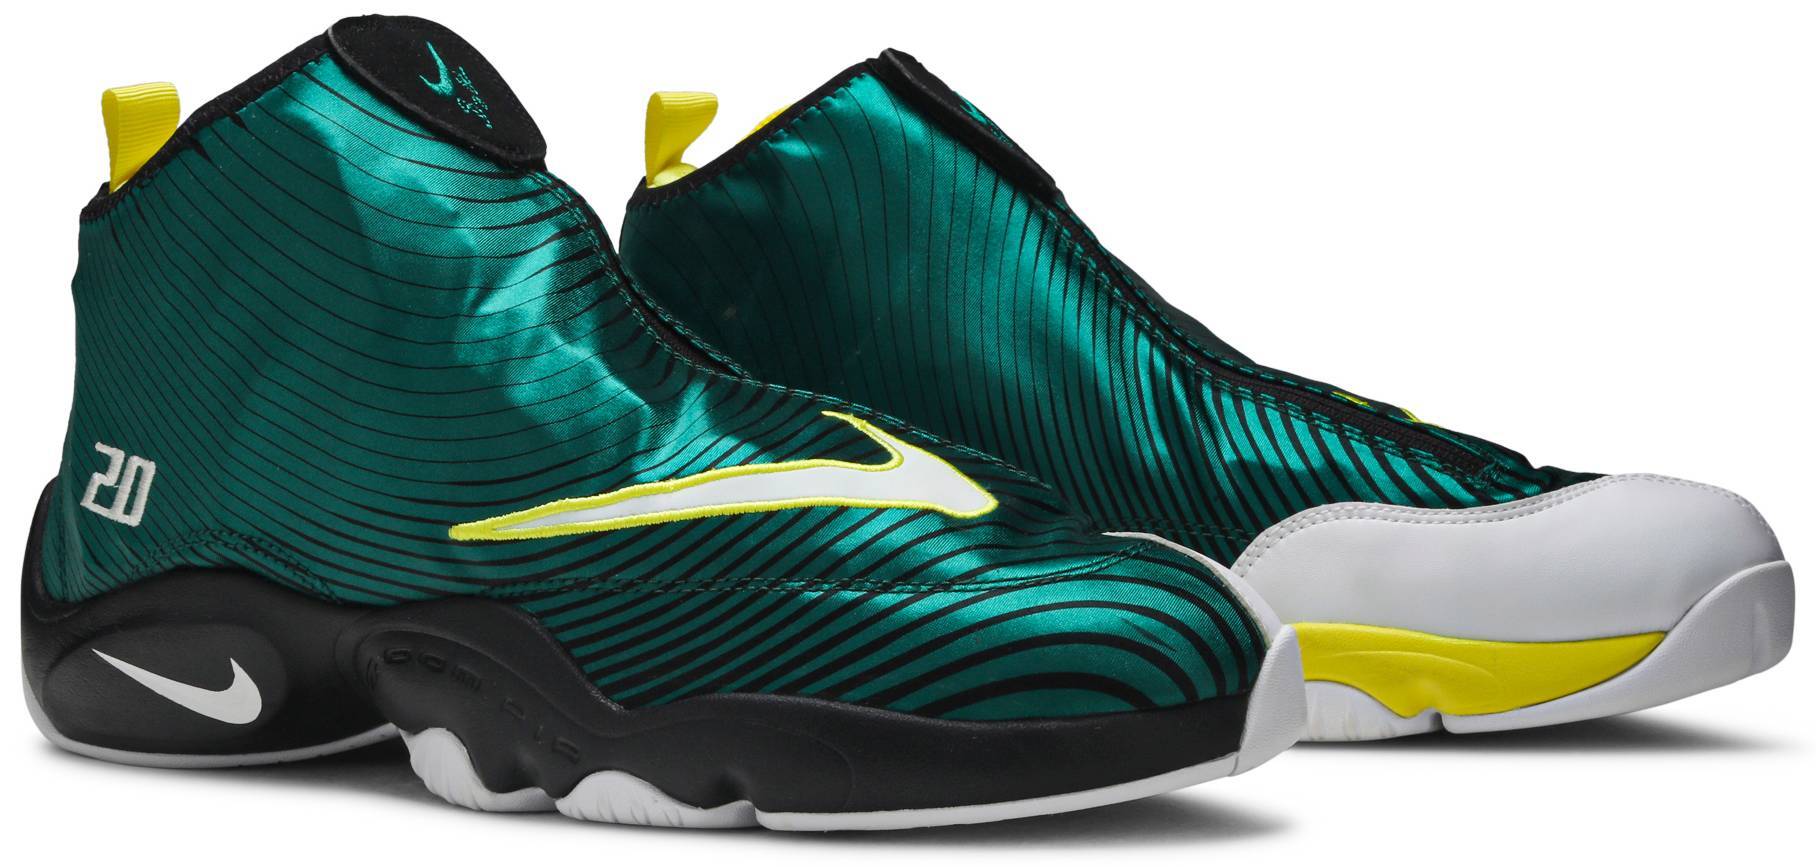 Nike Air Zoom Flight 98 The Glove Sole Collector Sonic Wave ナイキ エアズームフライト98 ザグローブ ソールコレクター ソニックウェーブ 限定 別注モデル Hypestreetstore